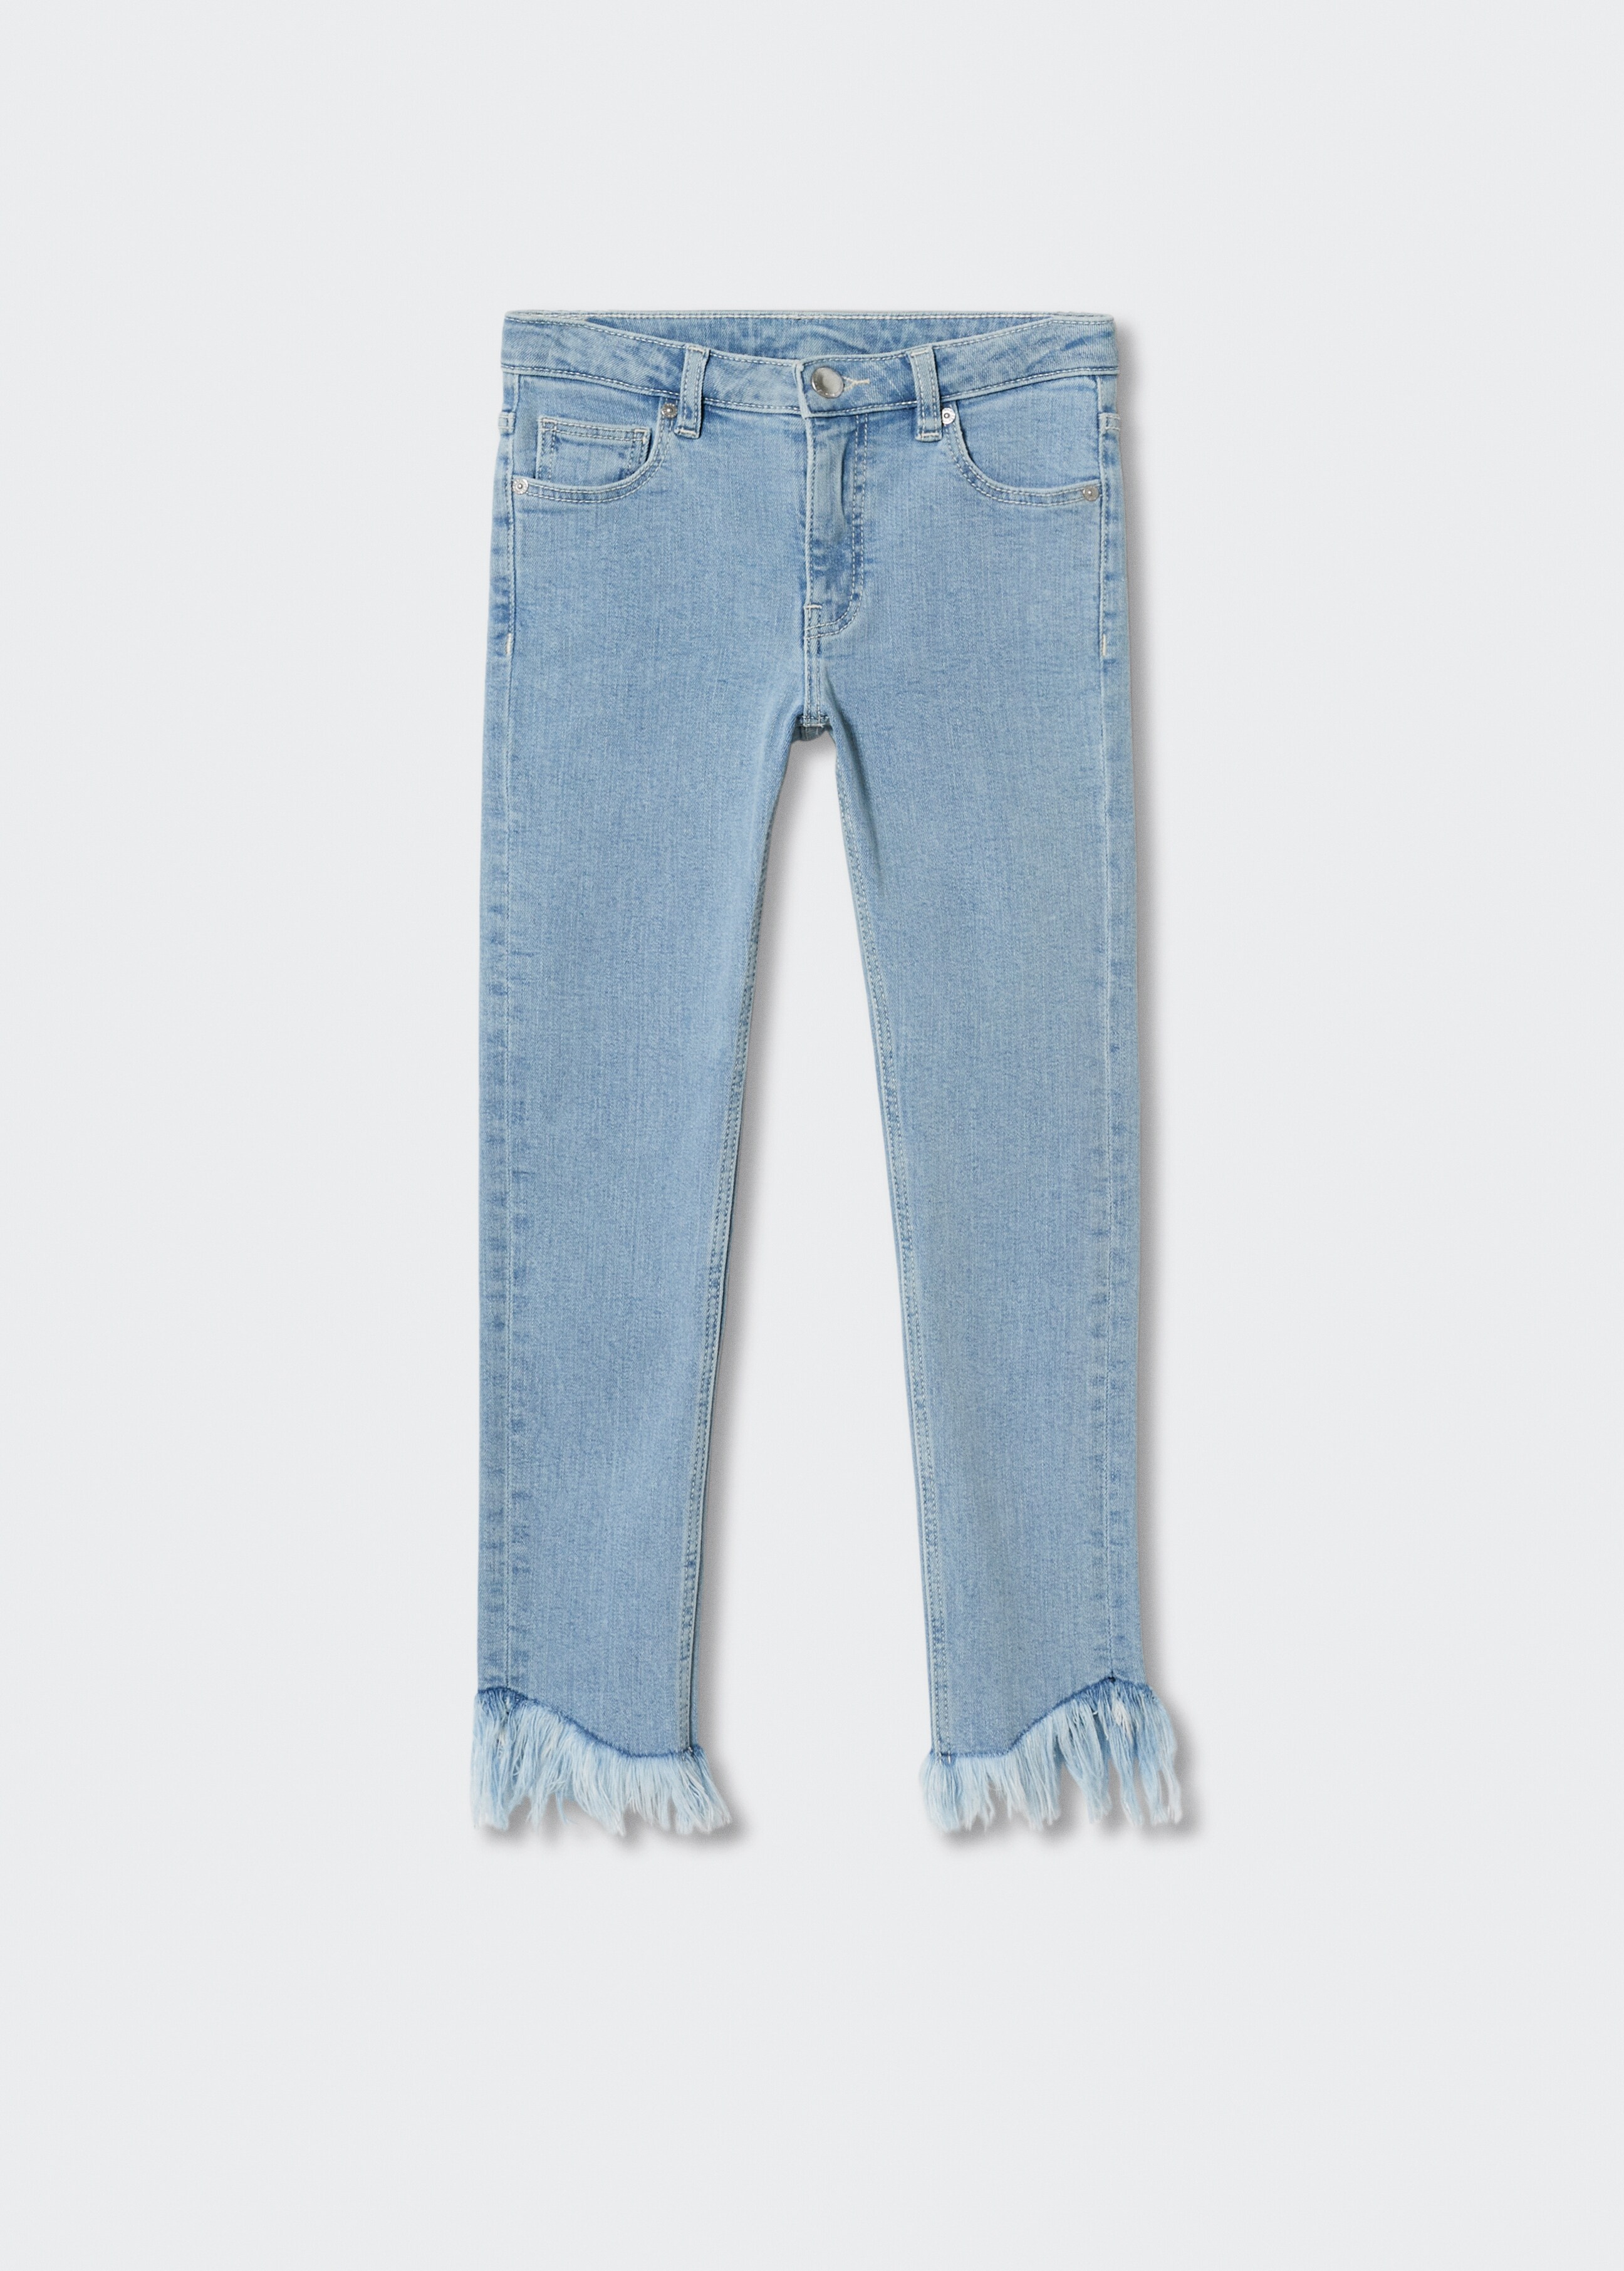 Skinny jeans with frayed hem  - Article without model